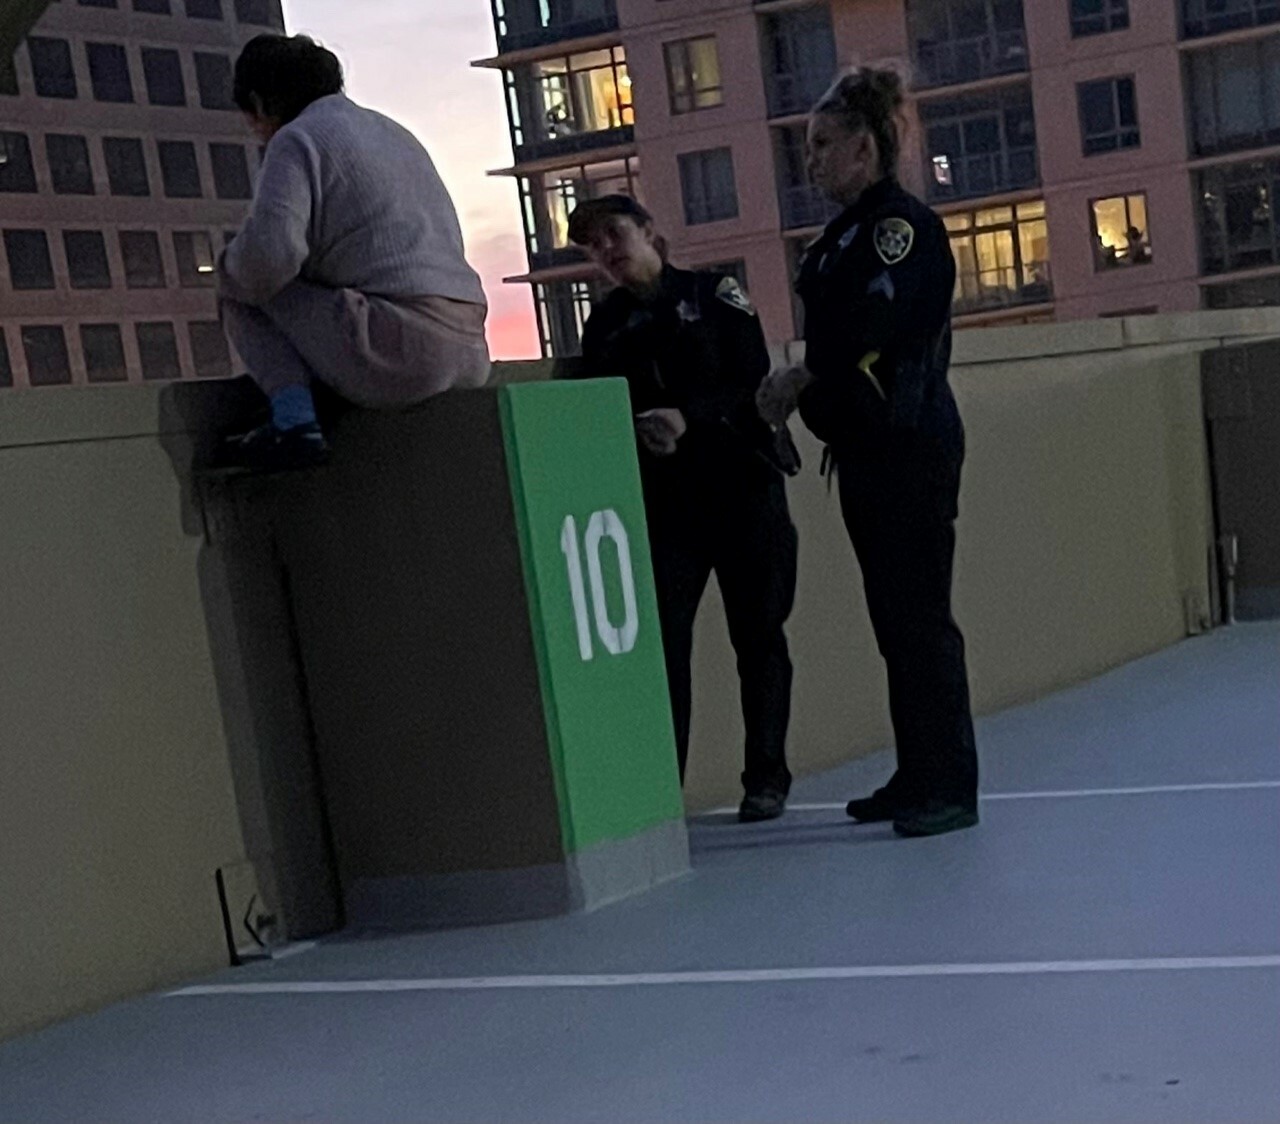 OPD Officers talking to a person